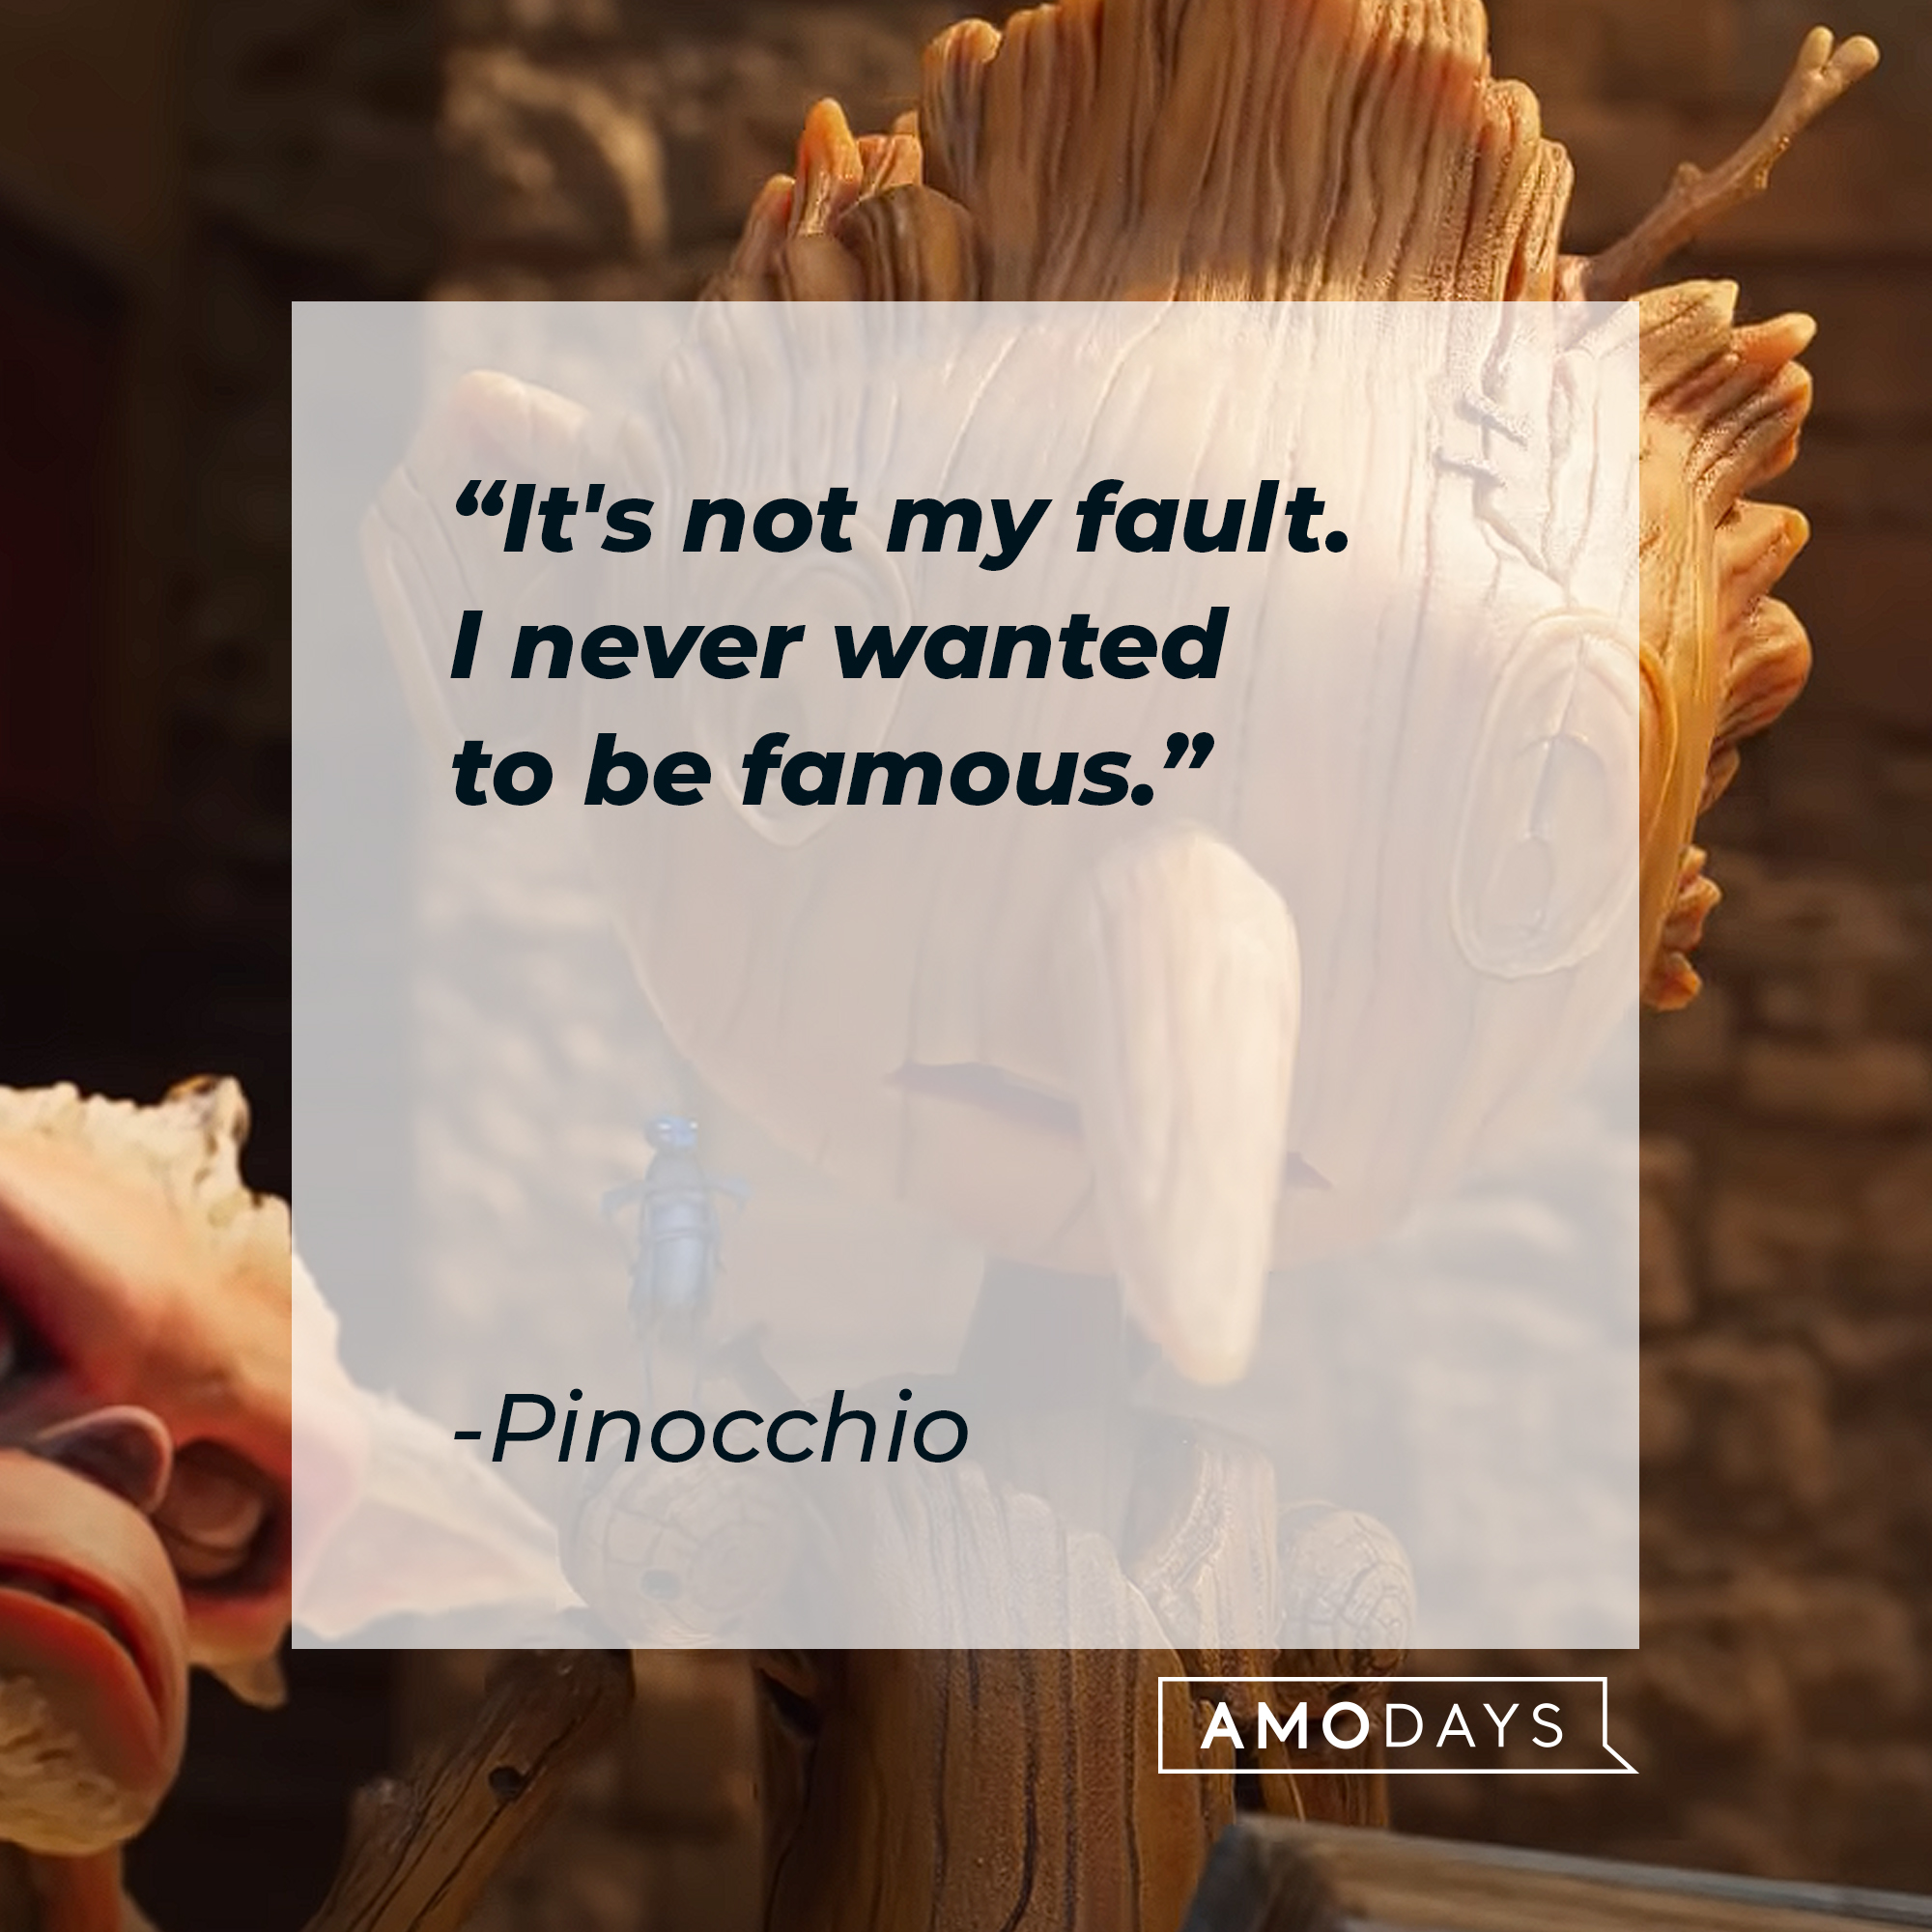 Pinocchio's quote: "It's not my fault. I never wanted to be famous." | Image: AmoDays